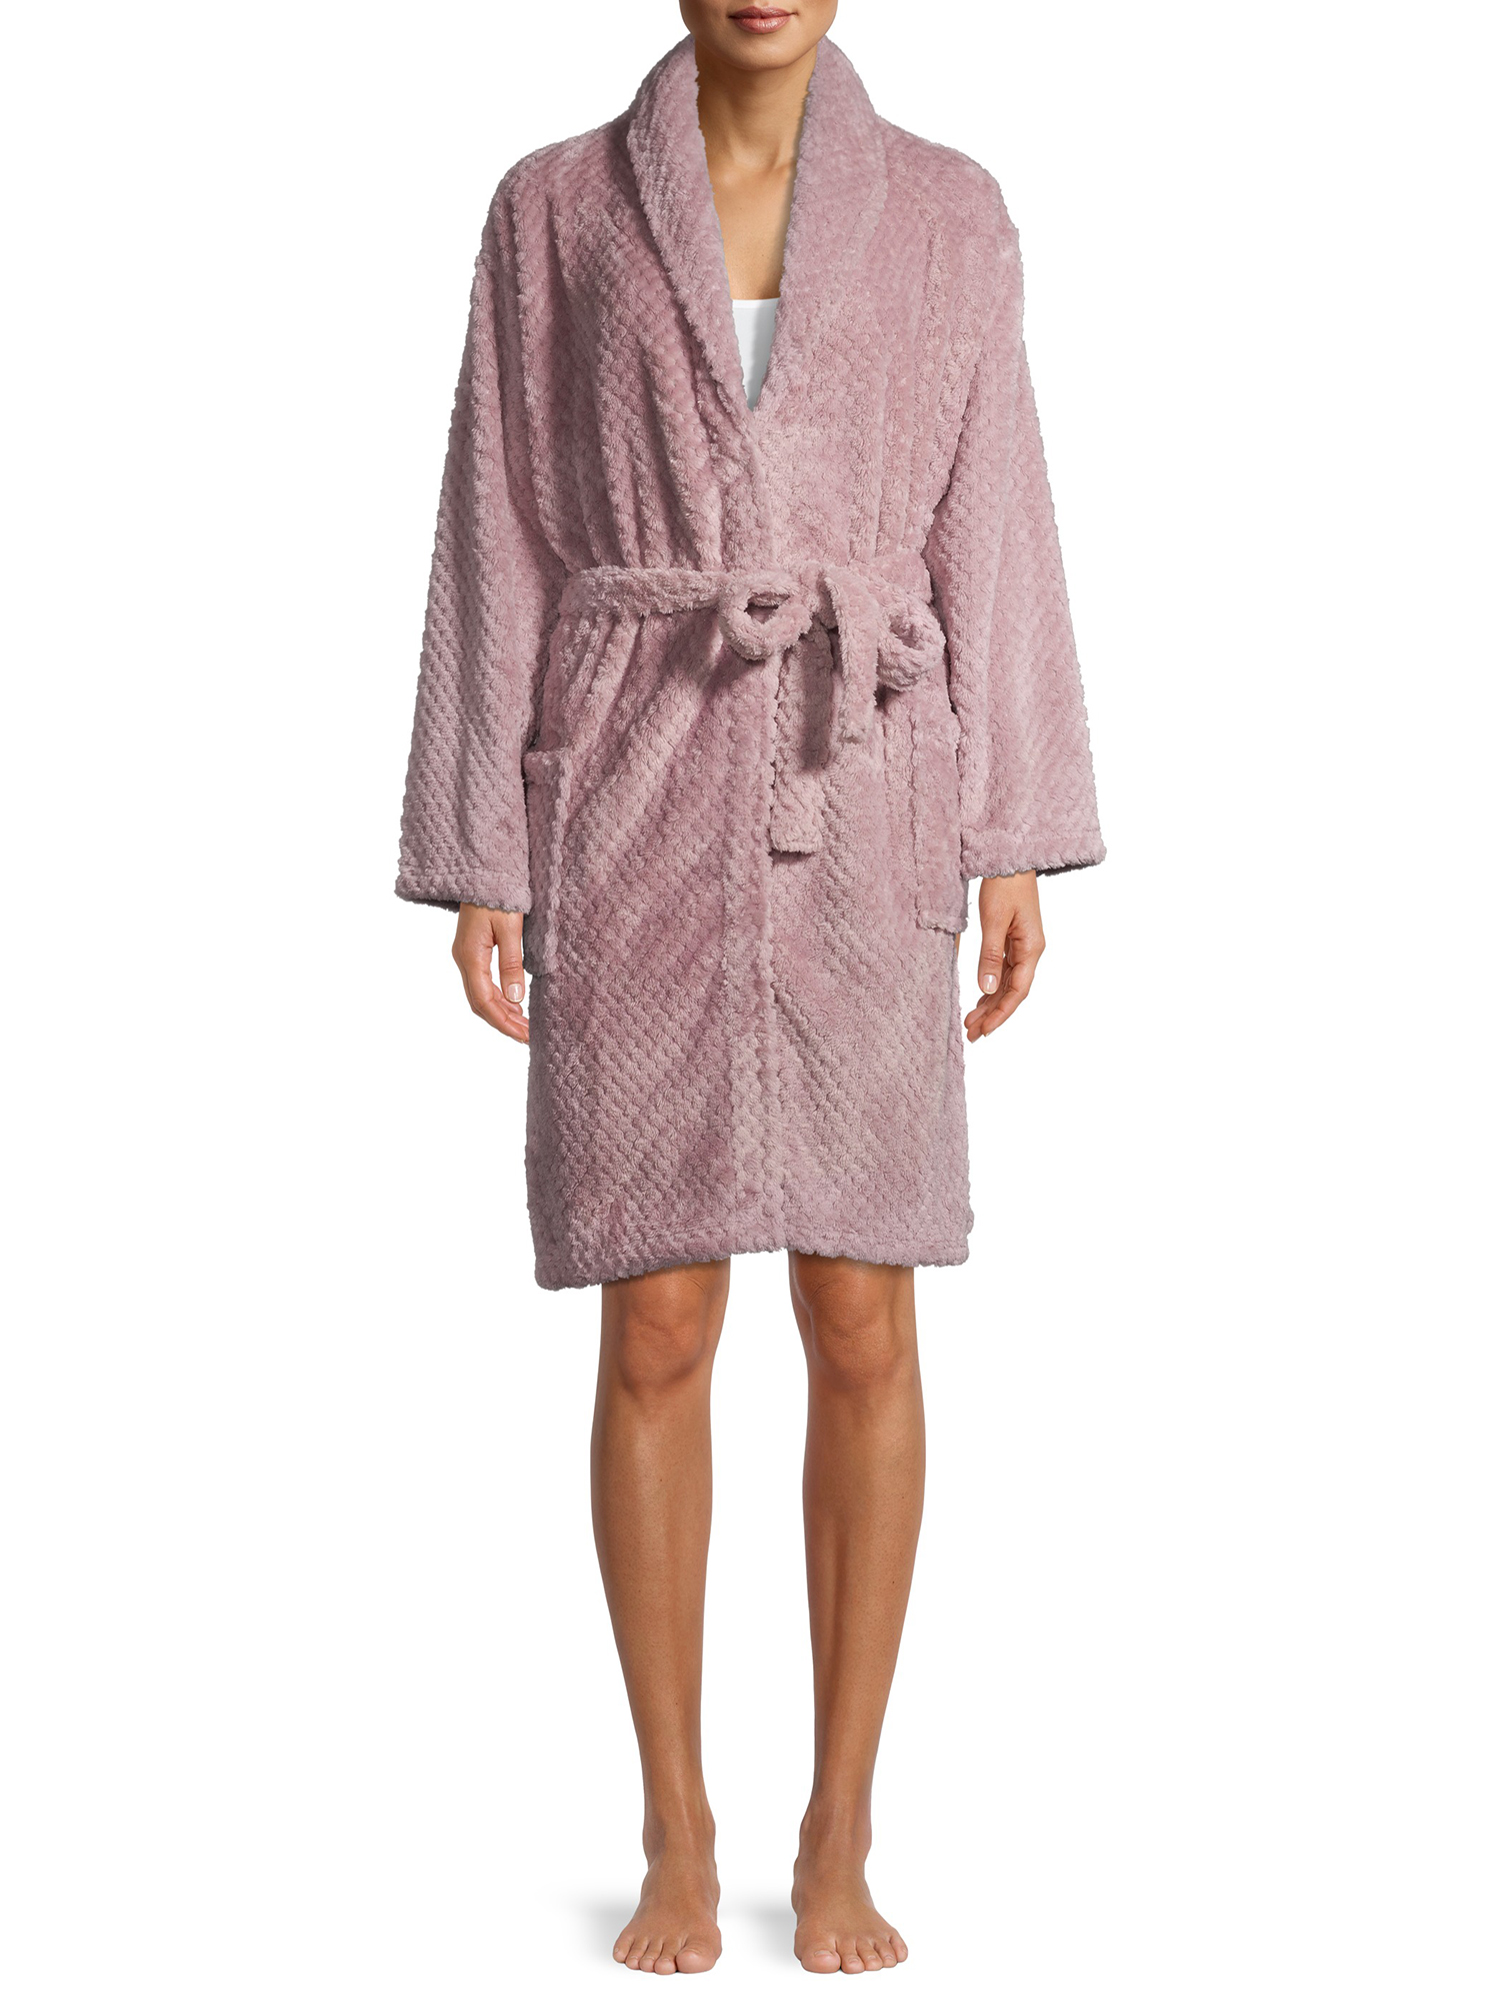 The Cozy Corner Club Durable Easy Care Textured Evening Robe (Women's), 1 Pack - image 1 of 7